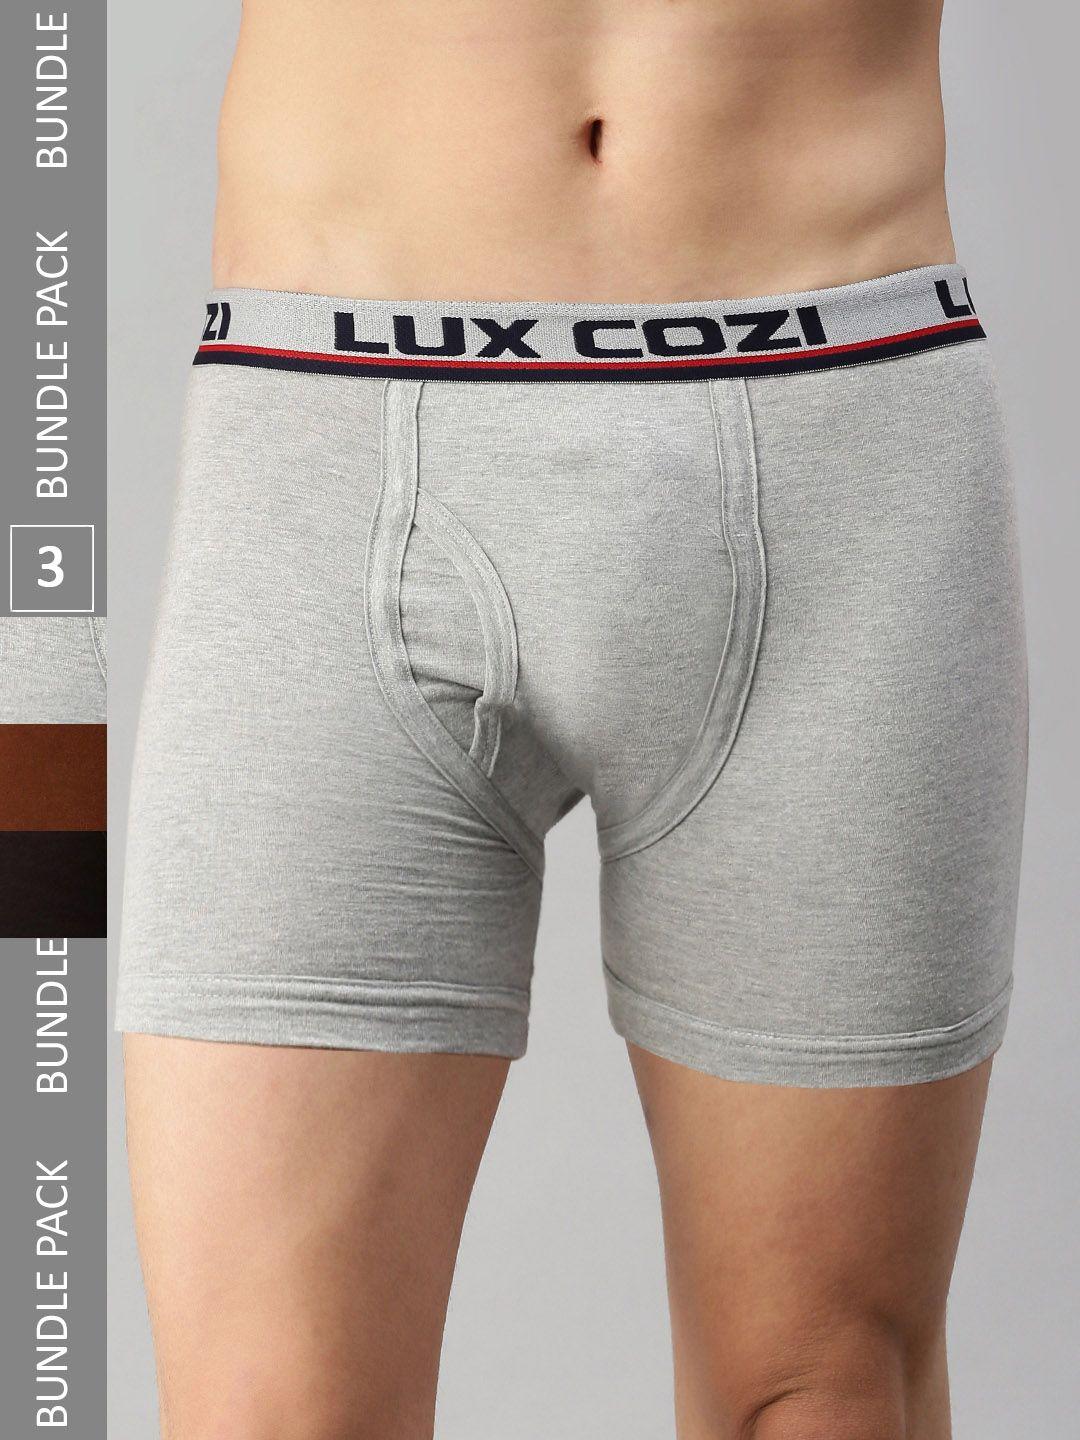 lux cozi men pack of 3 mid rise skin-friendly label free comfort long cotton trunk